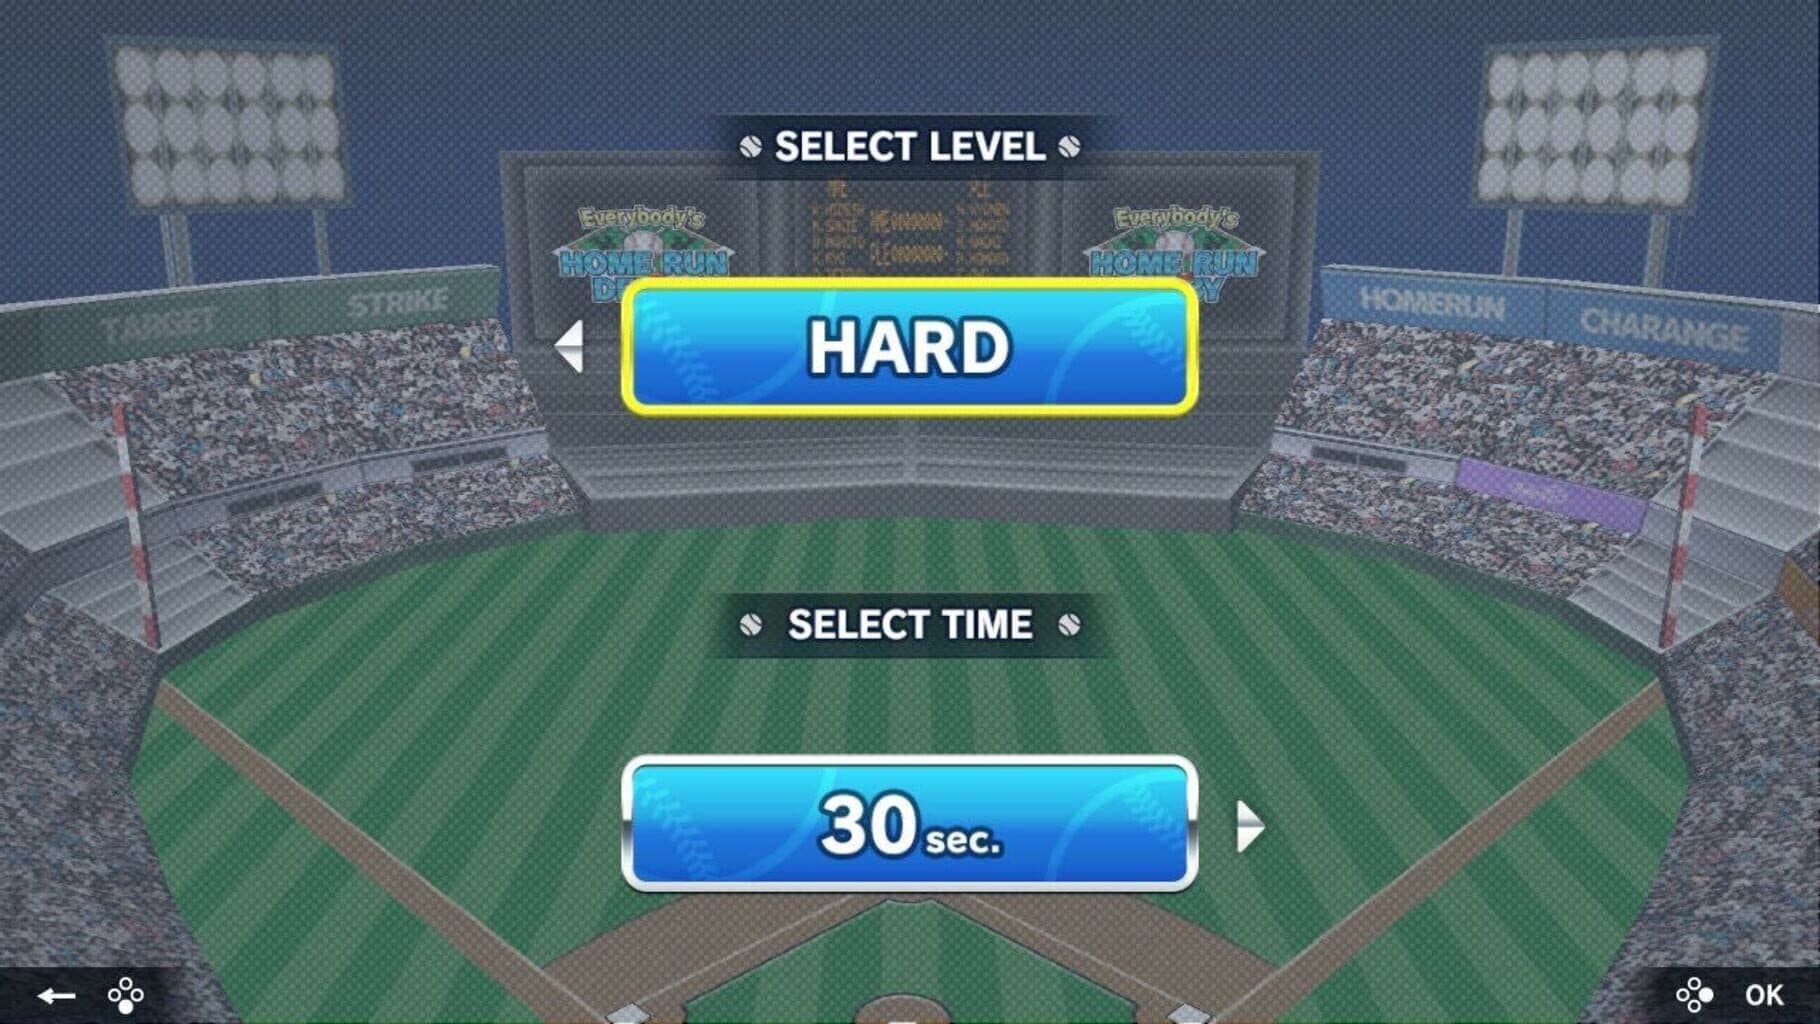 Everybody's Home Run Derby Image